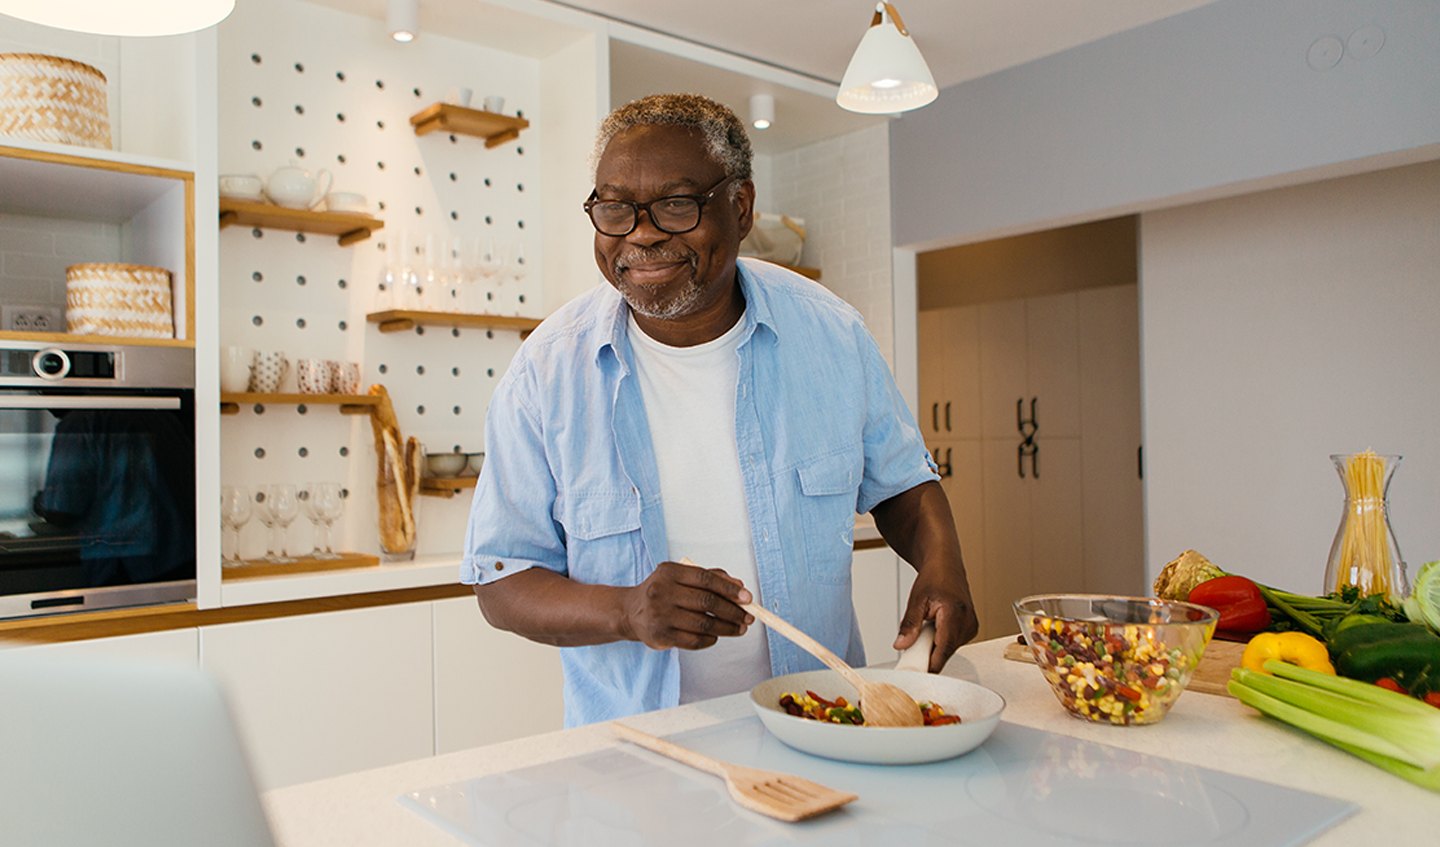 Older man wearing glasses and a light blue shirt mixing together ingredients in his tidy kitchen while watching a cooking video on his laptop